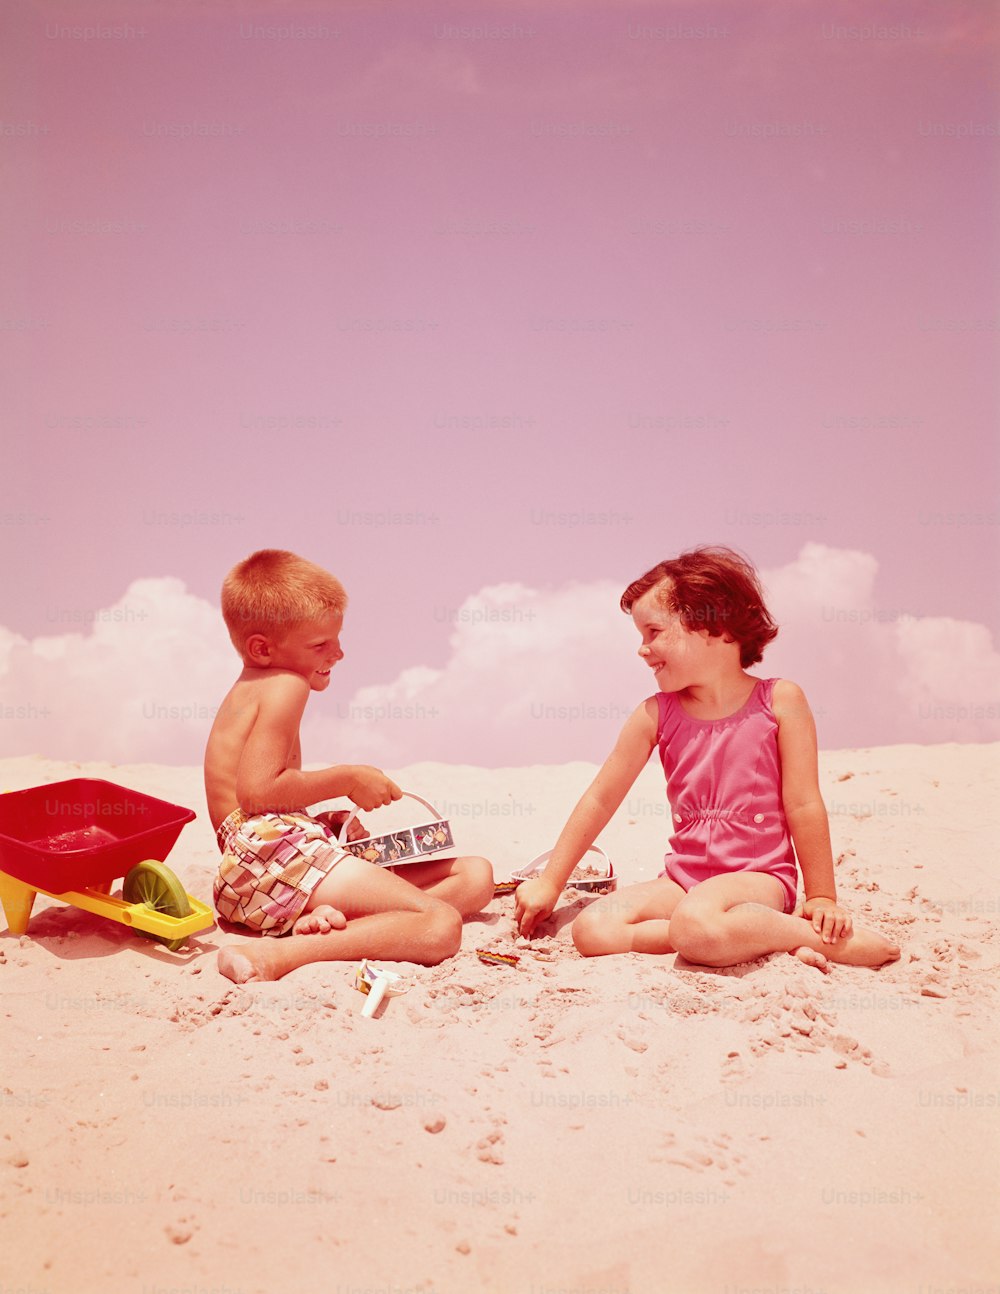 UNITED STATES - CIRCA 1960s:  Young couple sitting in sand, by seashore, flirting.